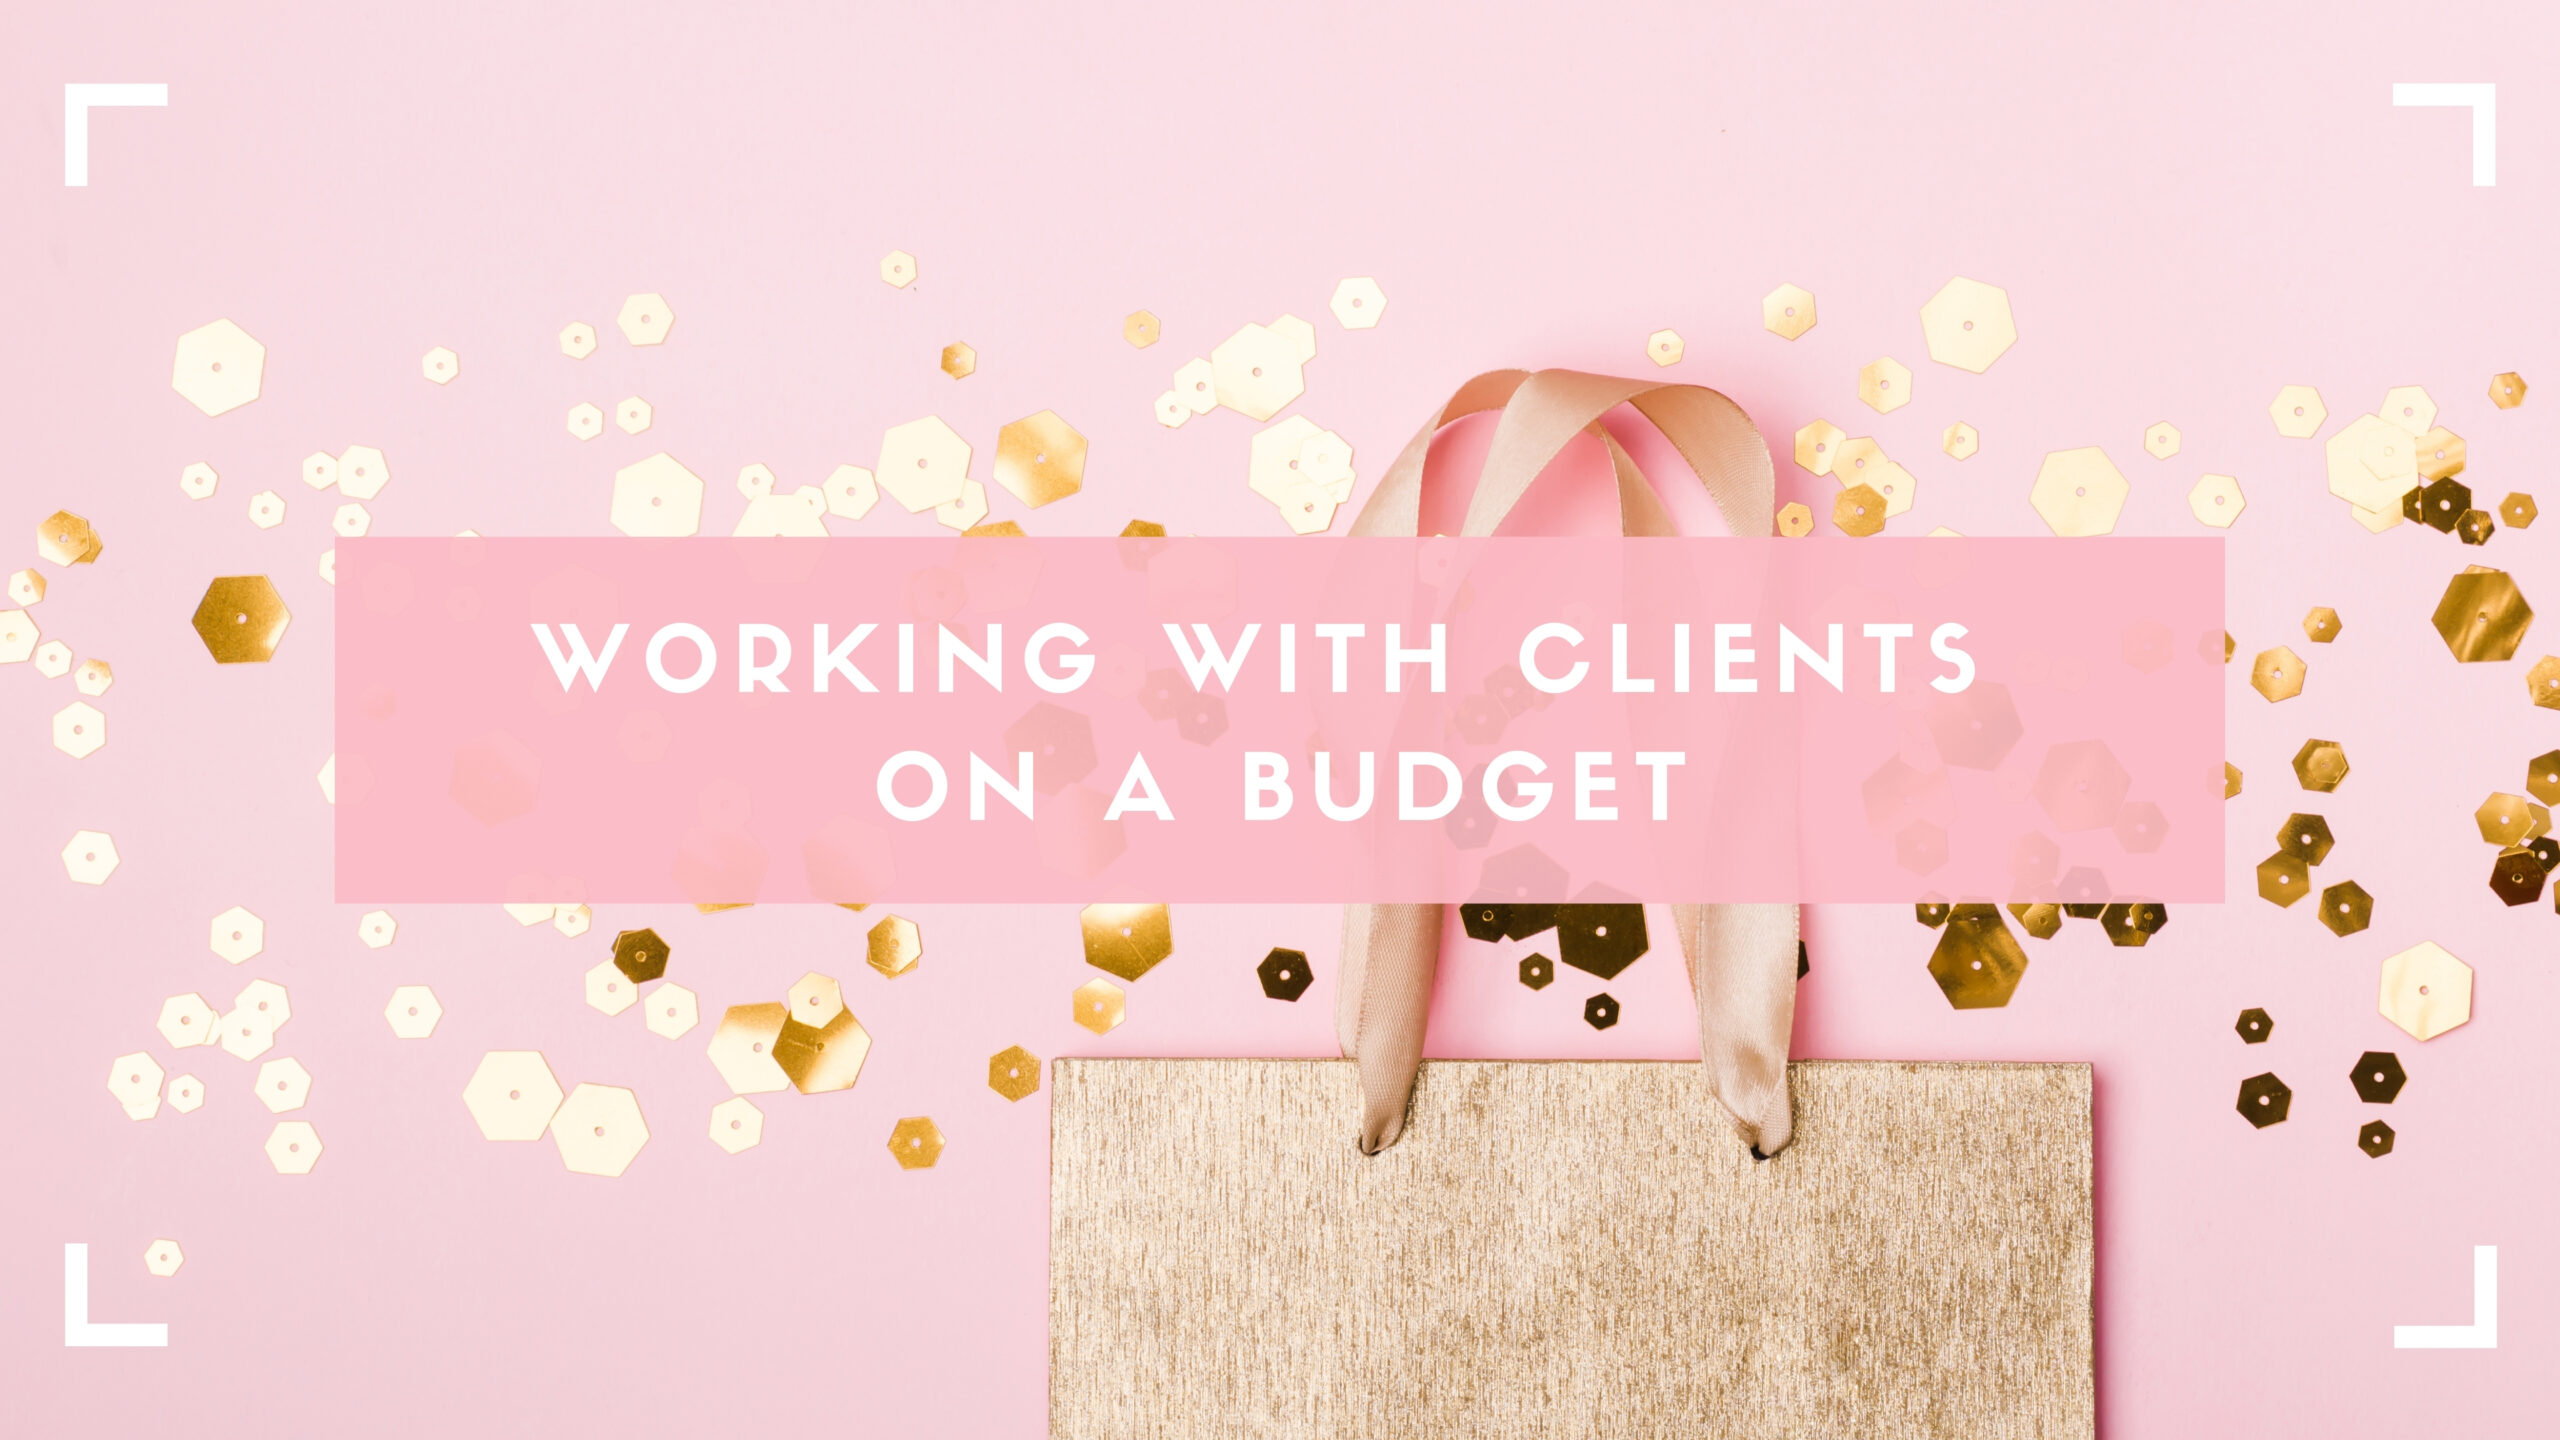 Working with clients on a budget